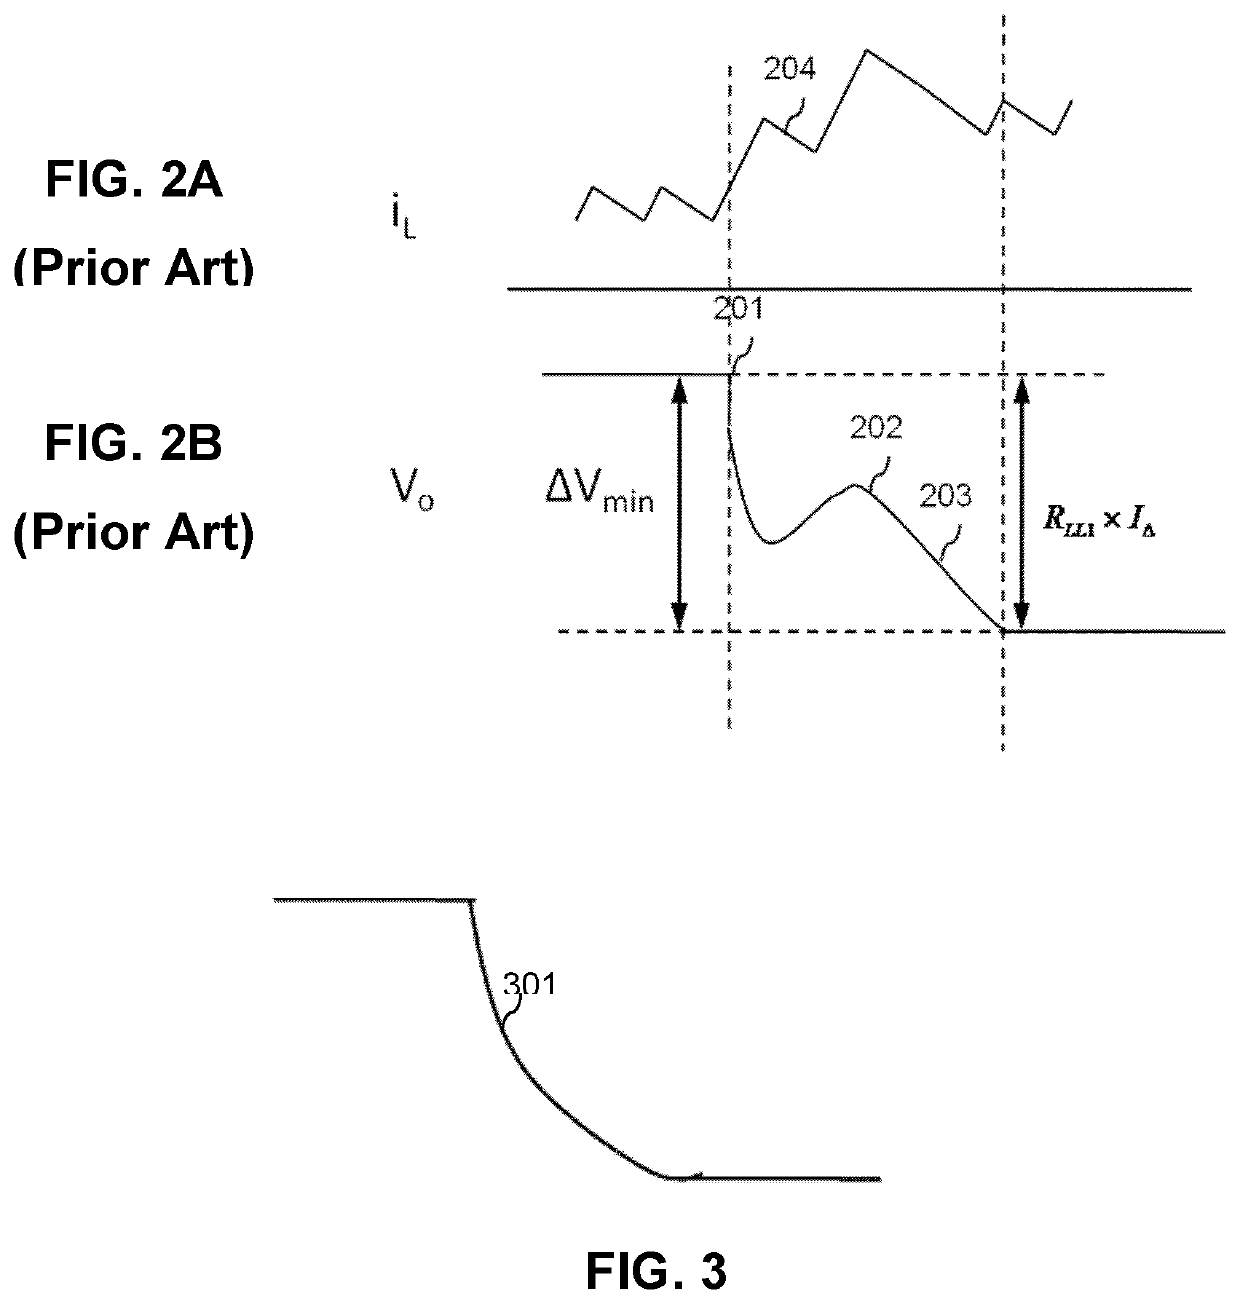 FAST TRANSIENT RESPONSE IN DC-to-DC CONVERTERS